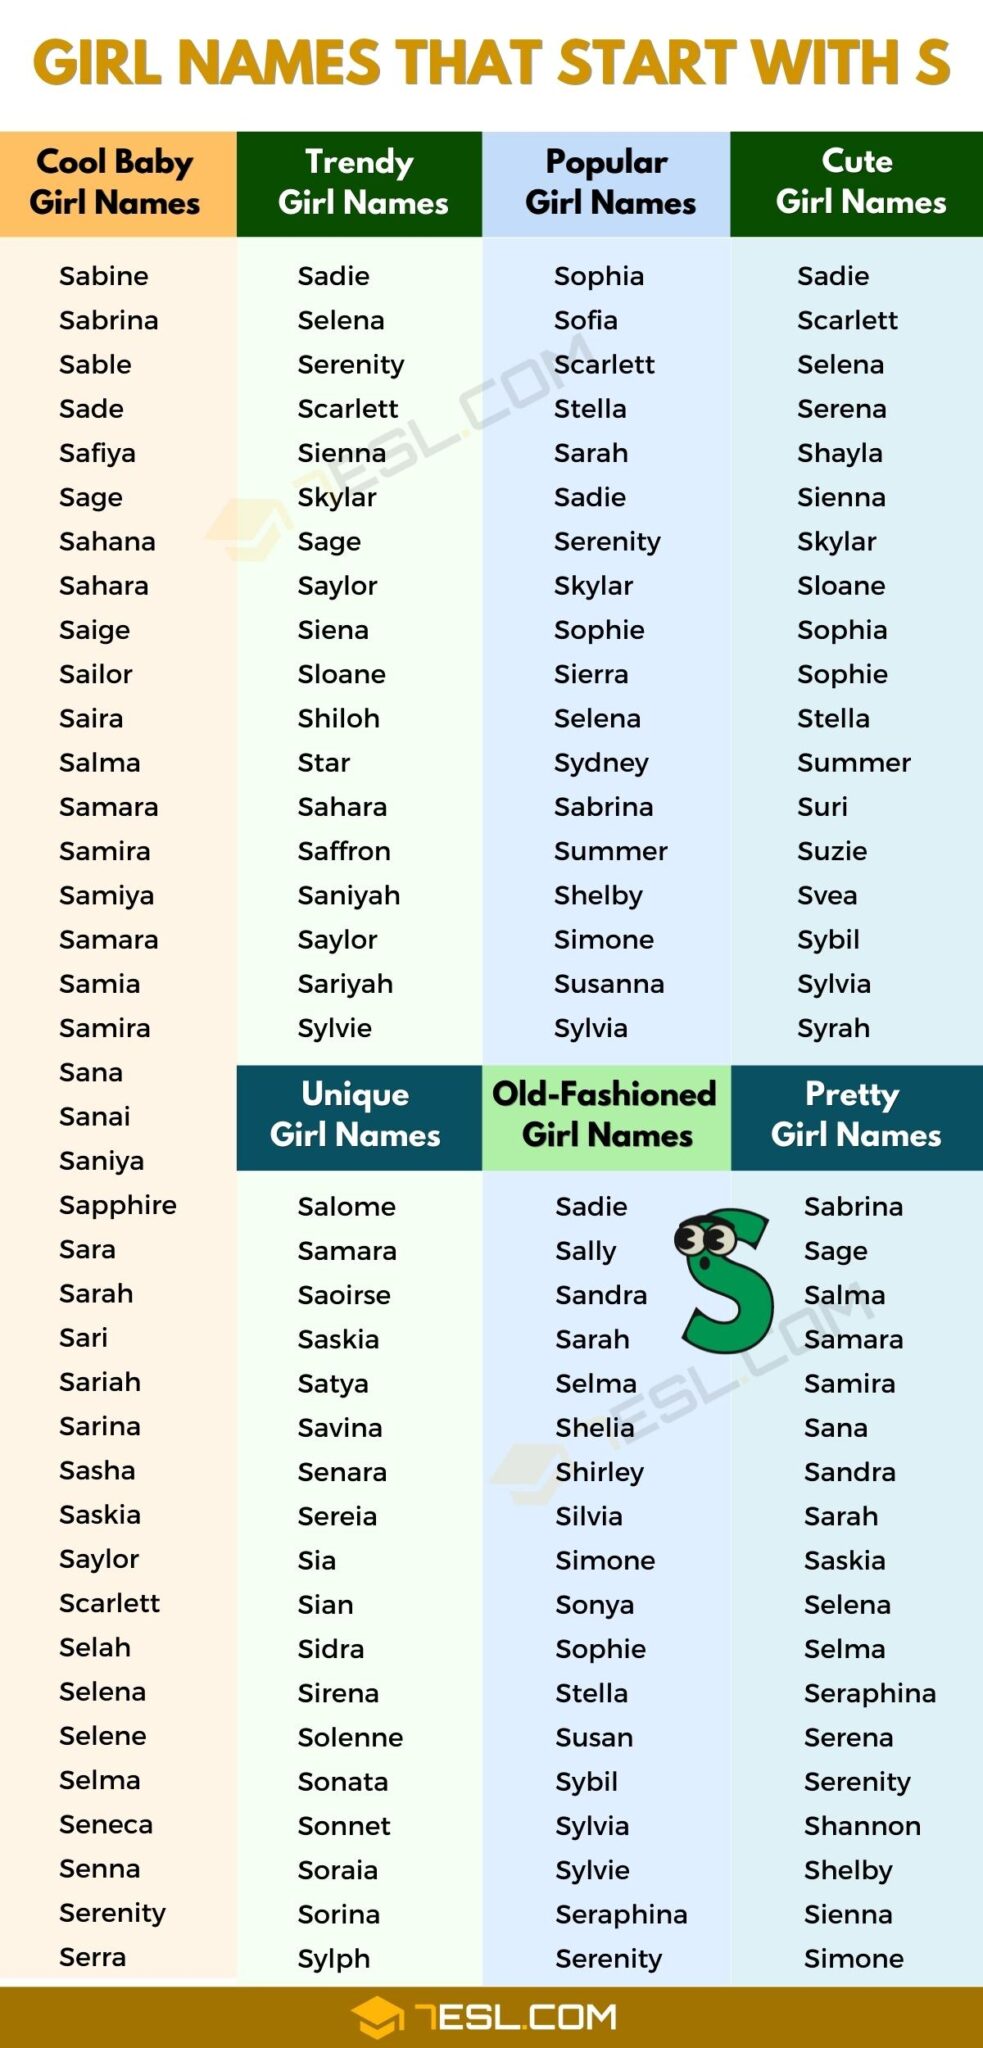 Girl Names Start With S